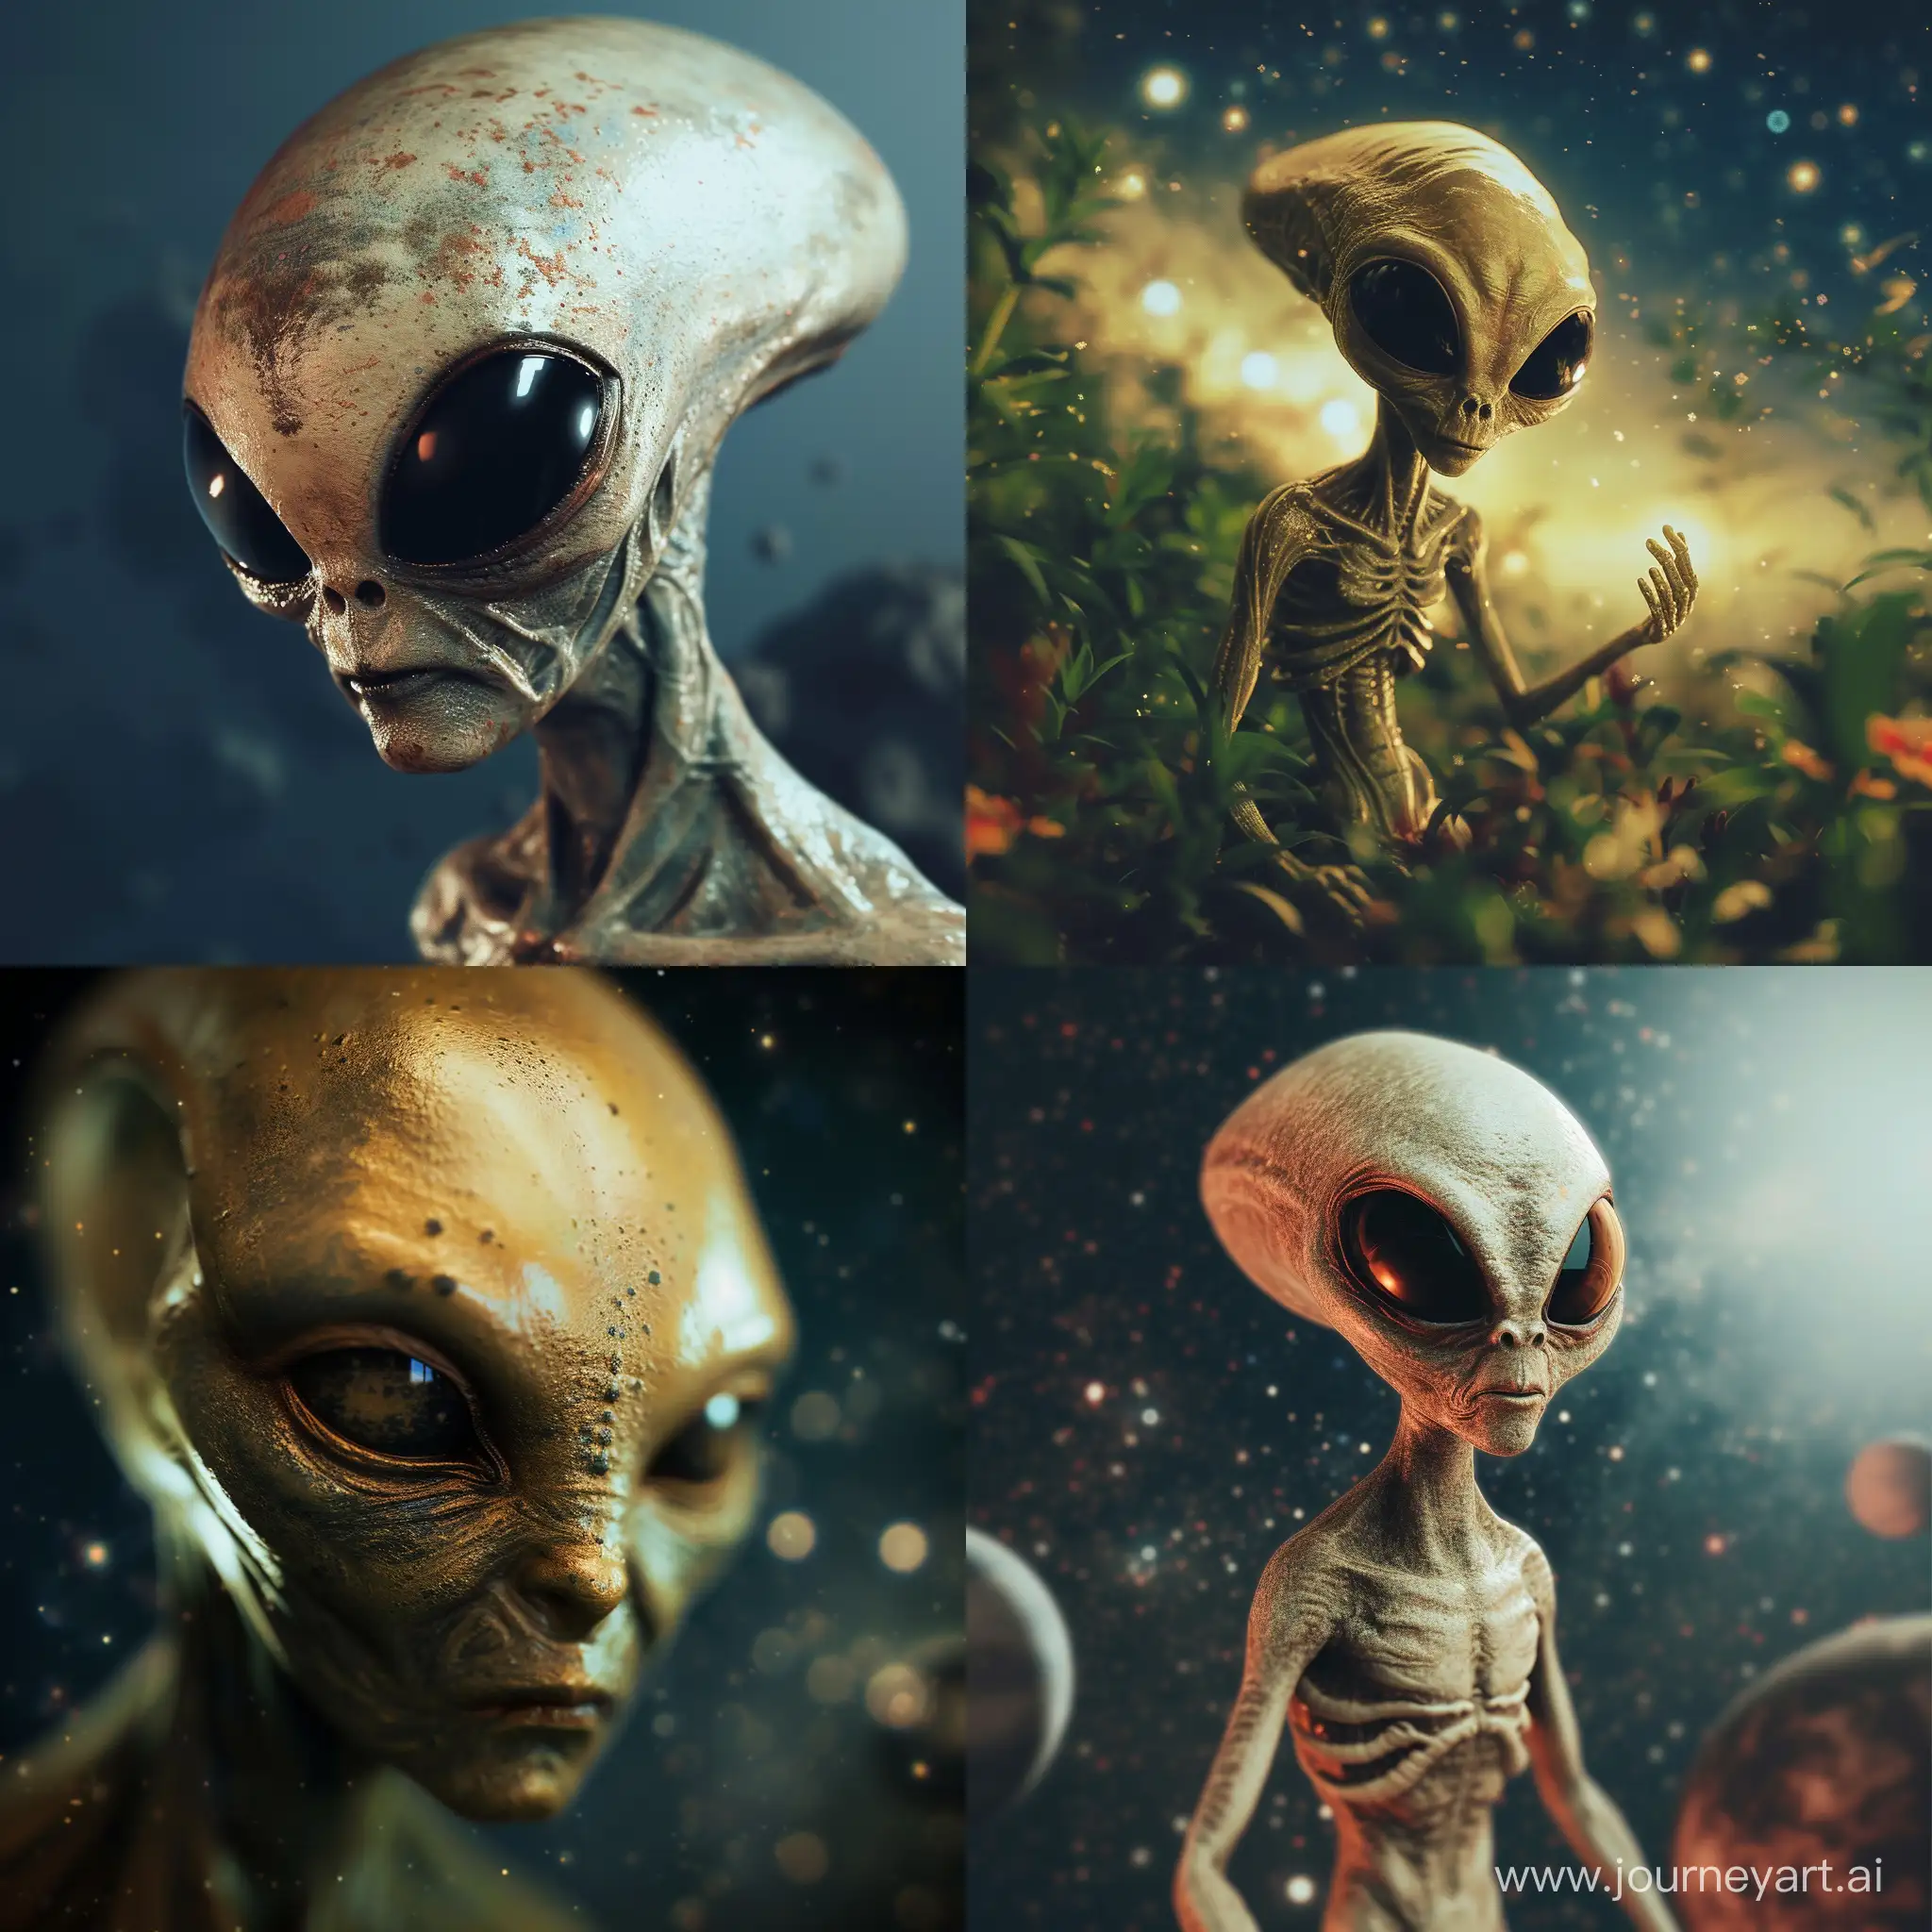 Historic-Encounter-First-Alien-Visit-from-Space